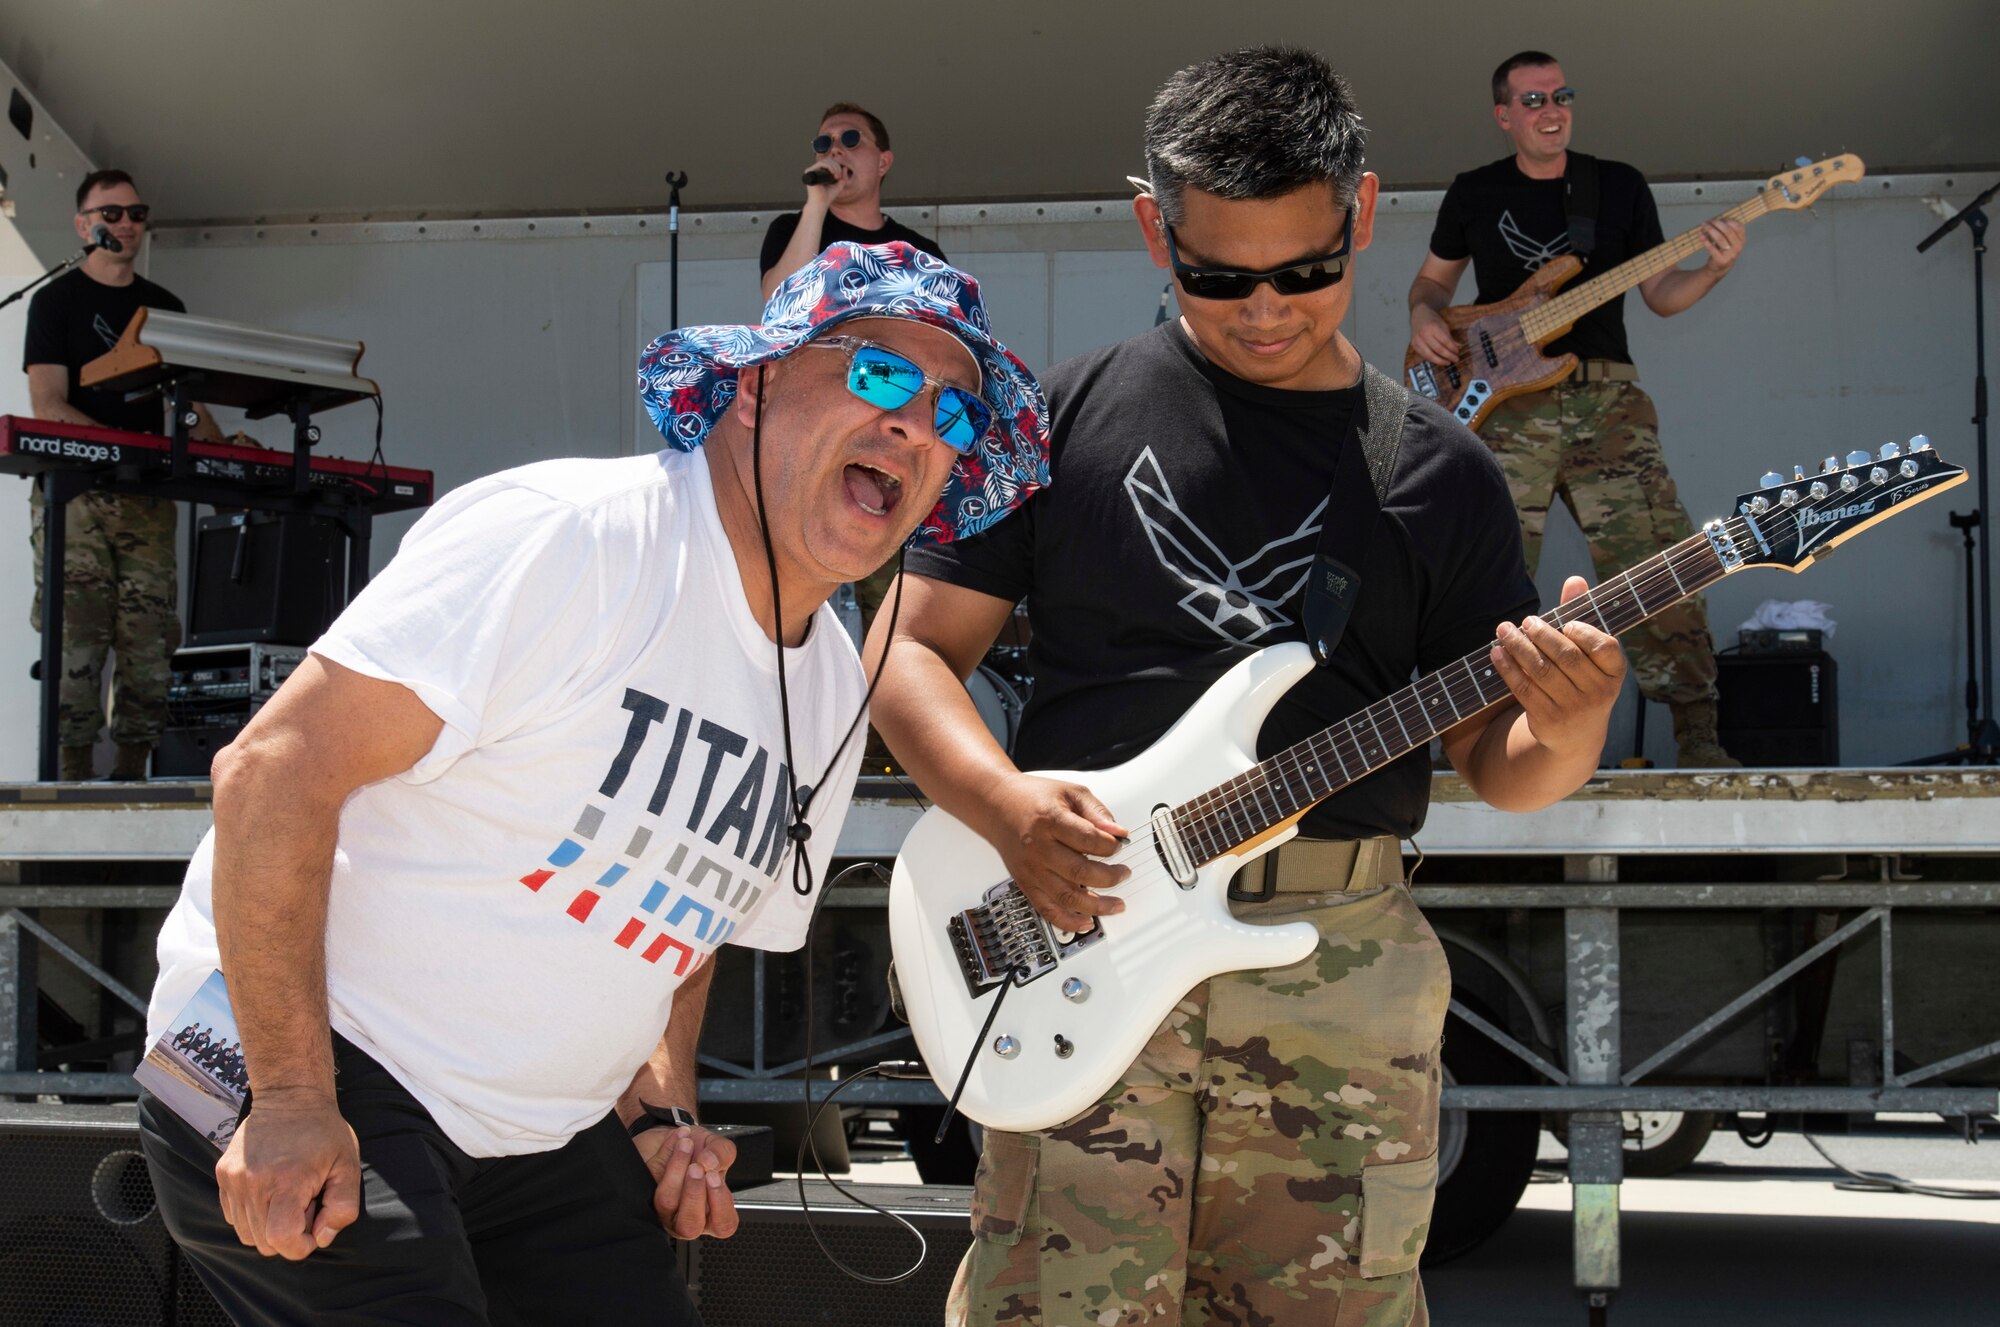 An airshow spectator joins Full Spectrum guitarist Tech. Sgt. Daniel Santos as he plays a solo during the 2022 Thunder Over Dover Airshow at Dover Air Force Base, Delaware, May 21, 2022. Full Spectrum is a part of the U.S. Air Force Heritage of America Band based out of Joint Base Langley-Eustis, Virginia. (U.S. Air Force photo by Roland Balik)